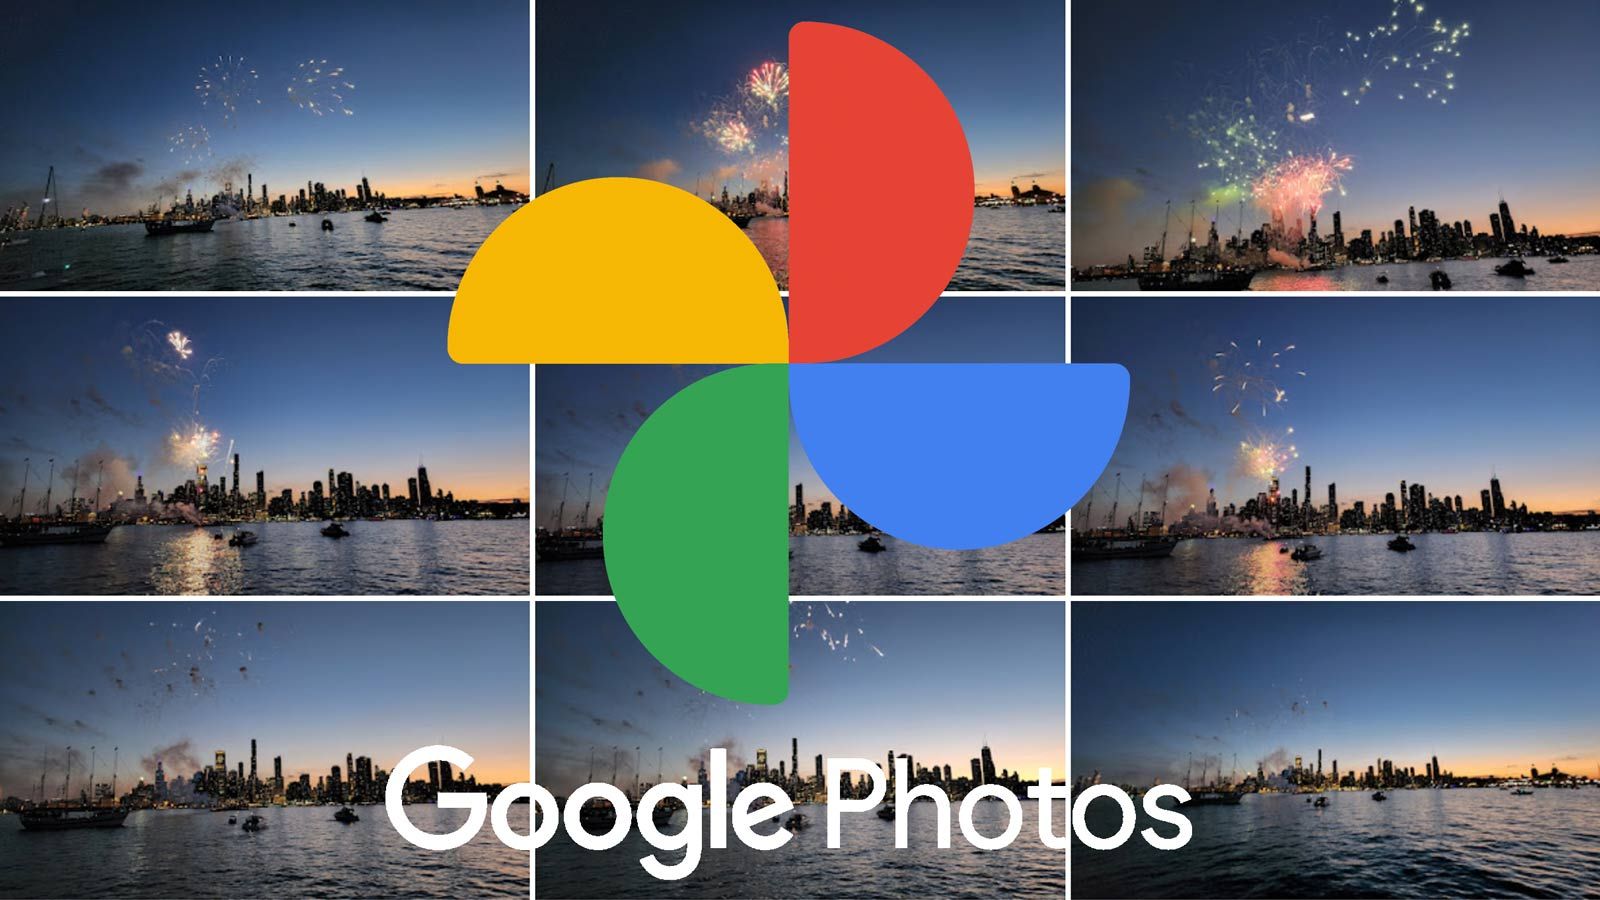 The Google Photos logo placed in front of 9 images of fireworks